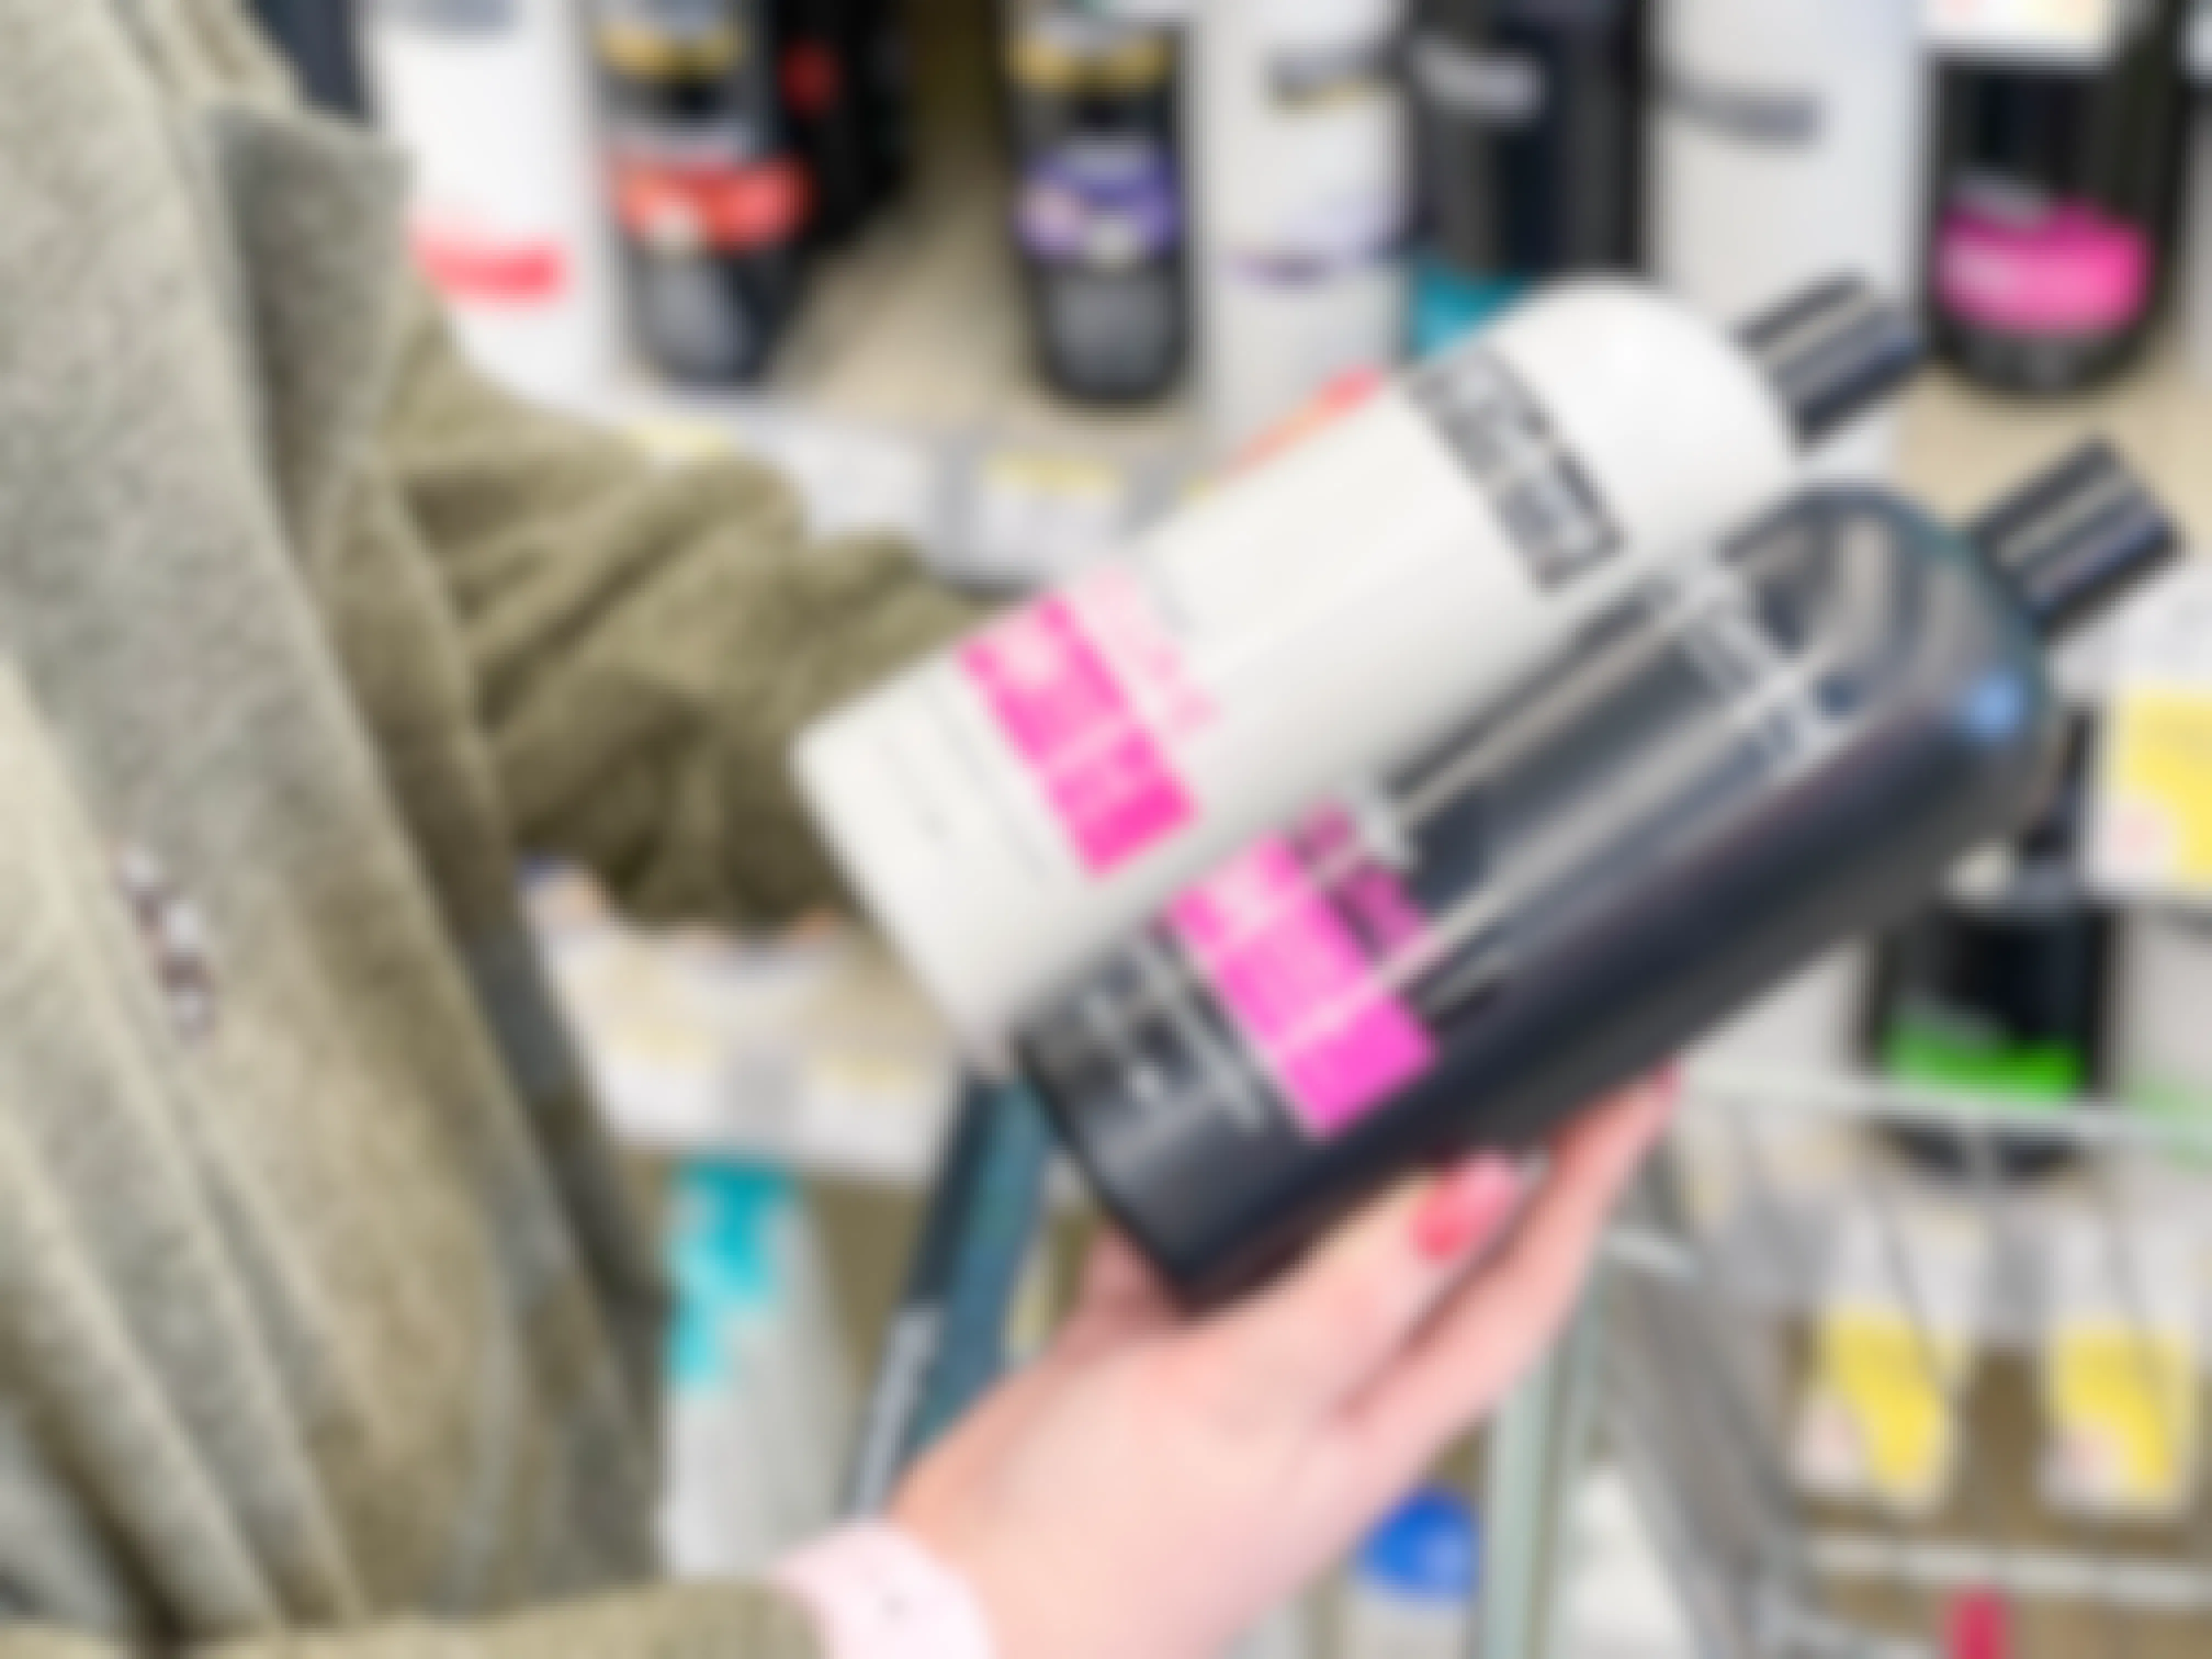 A person holding bottles of TRESemme shampoo and conditioner in the hair care aisle of Walgreens.